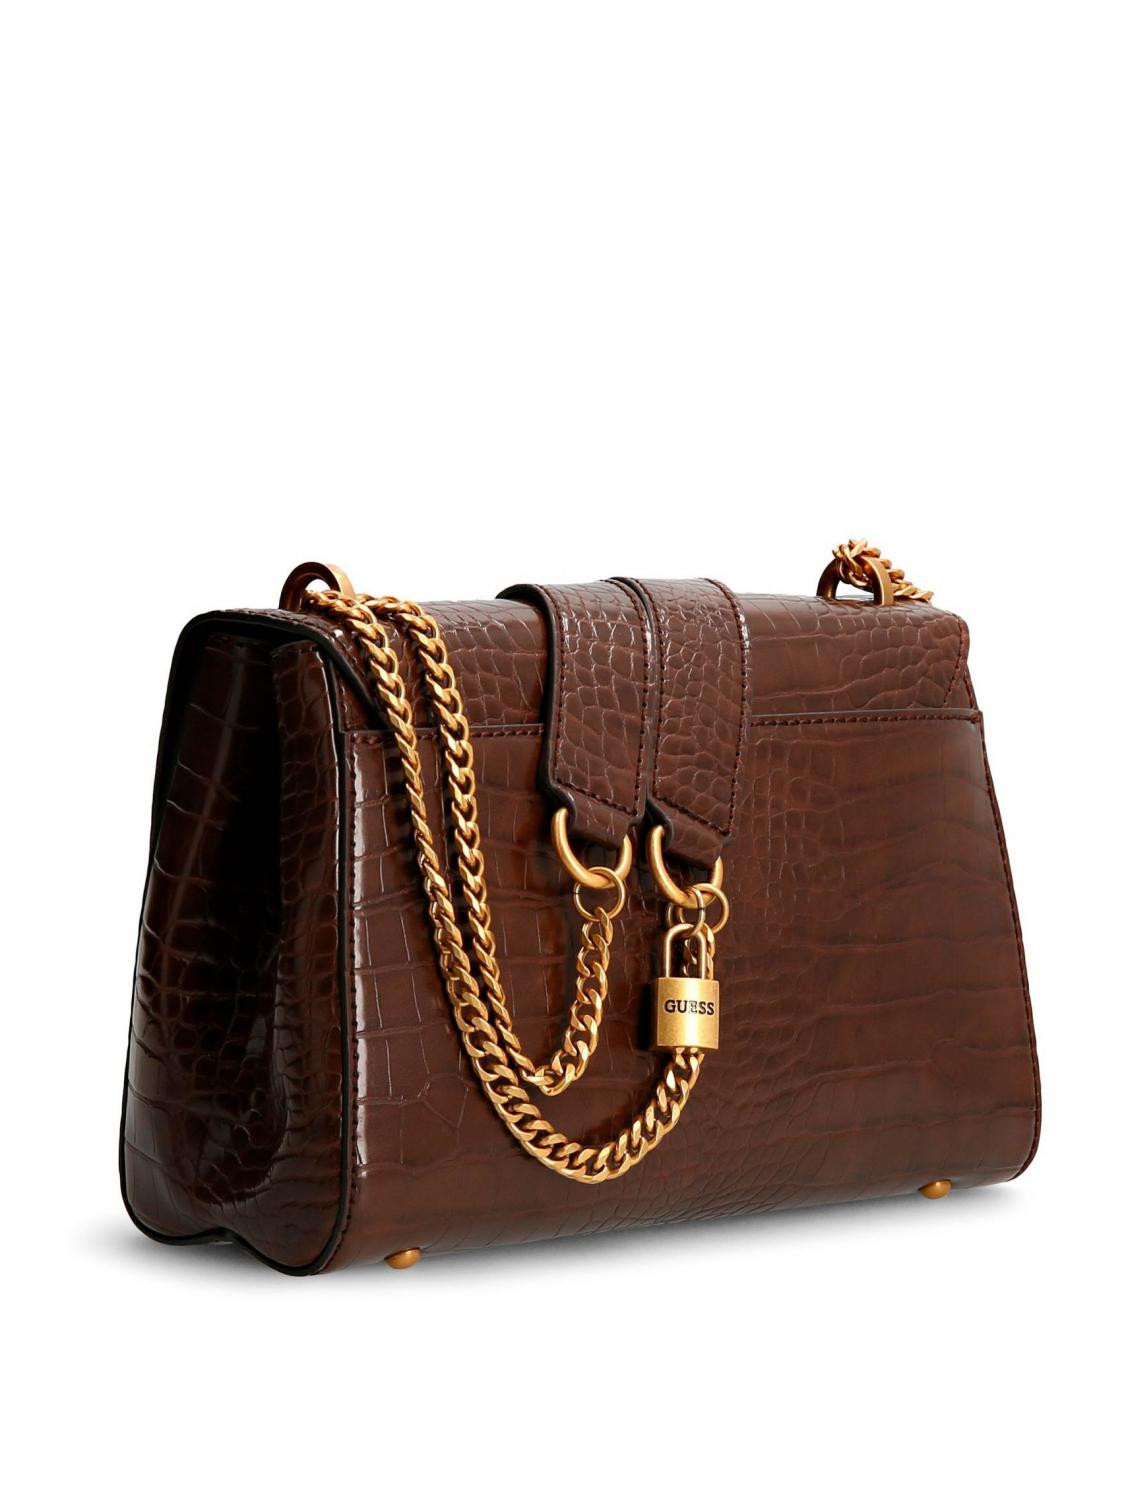 Buy Guess Katey Mini Satchel Brown Bag from the Next UK online shop